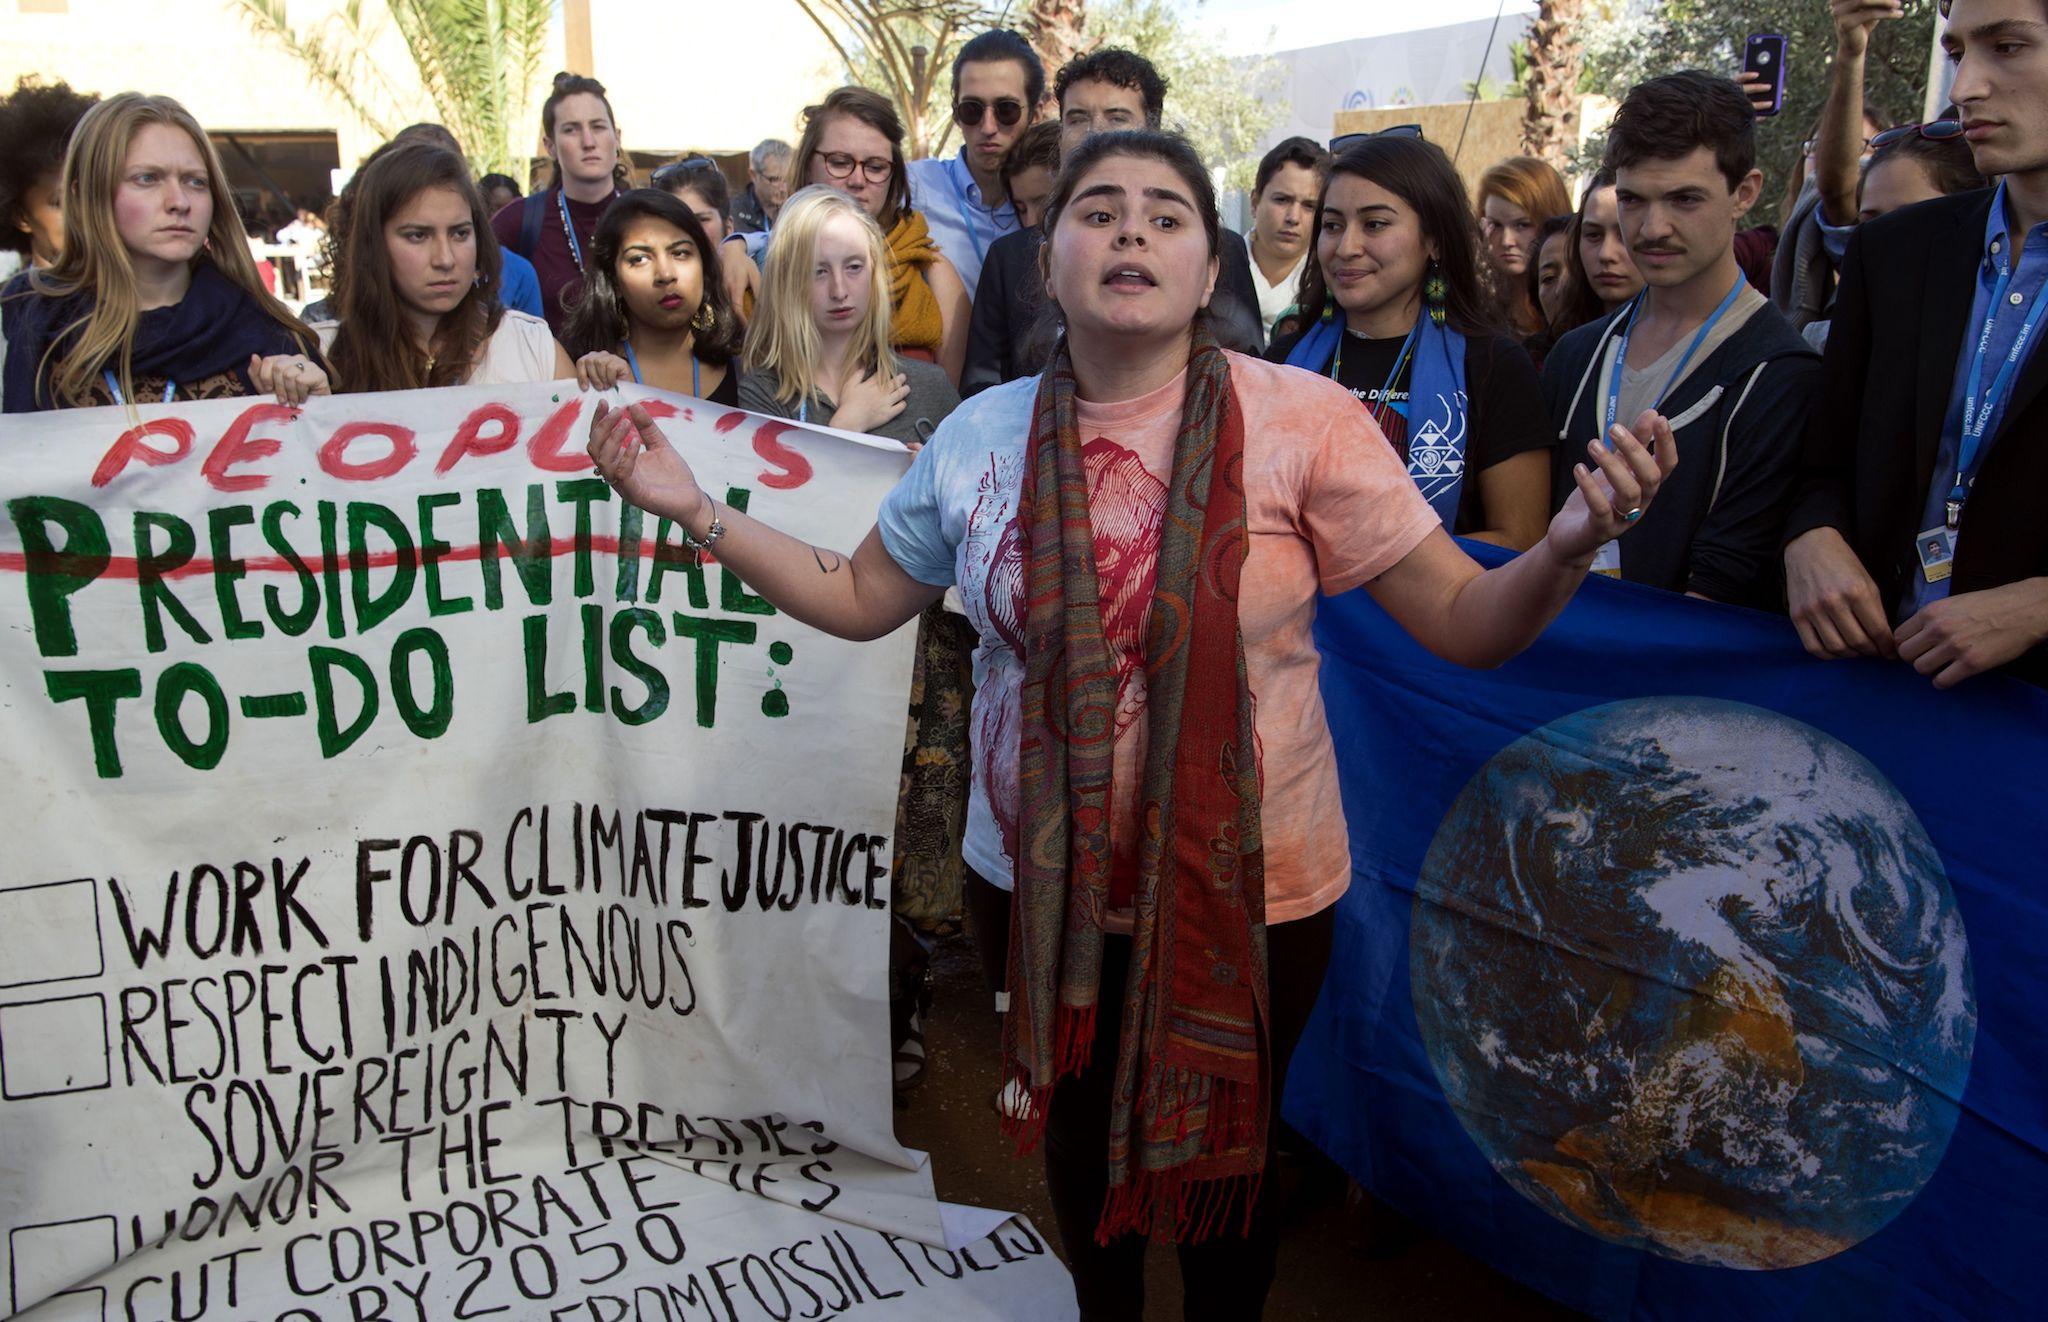 American students protest outside the UN climate talks during the COP22 international climate conference in Marrakesh in reaction to Donald Trump's victory in the US presidential election, on November 9, 2016